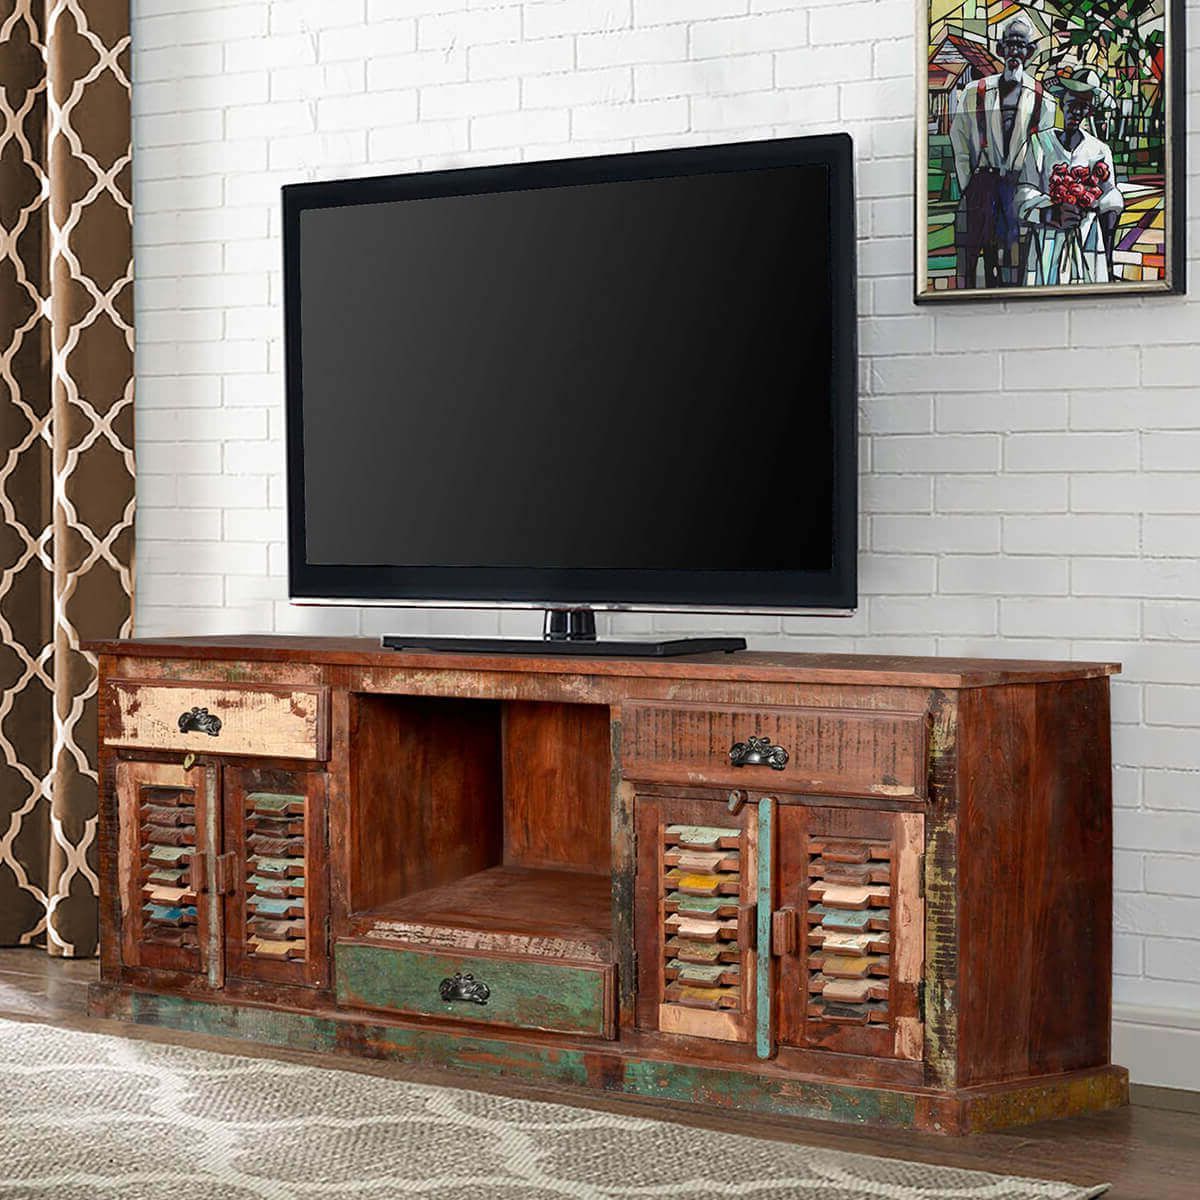 Rustic Reclaimed Wood Large Tv Stand Media Console With Modern Tv Stands In Oak Wood And Black Accents With Storage Doors (View 9 of 20)